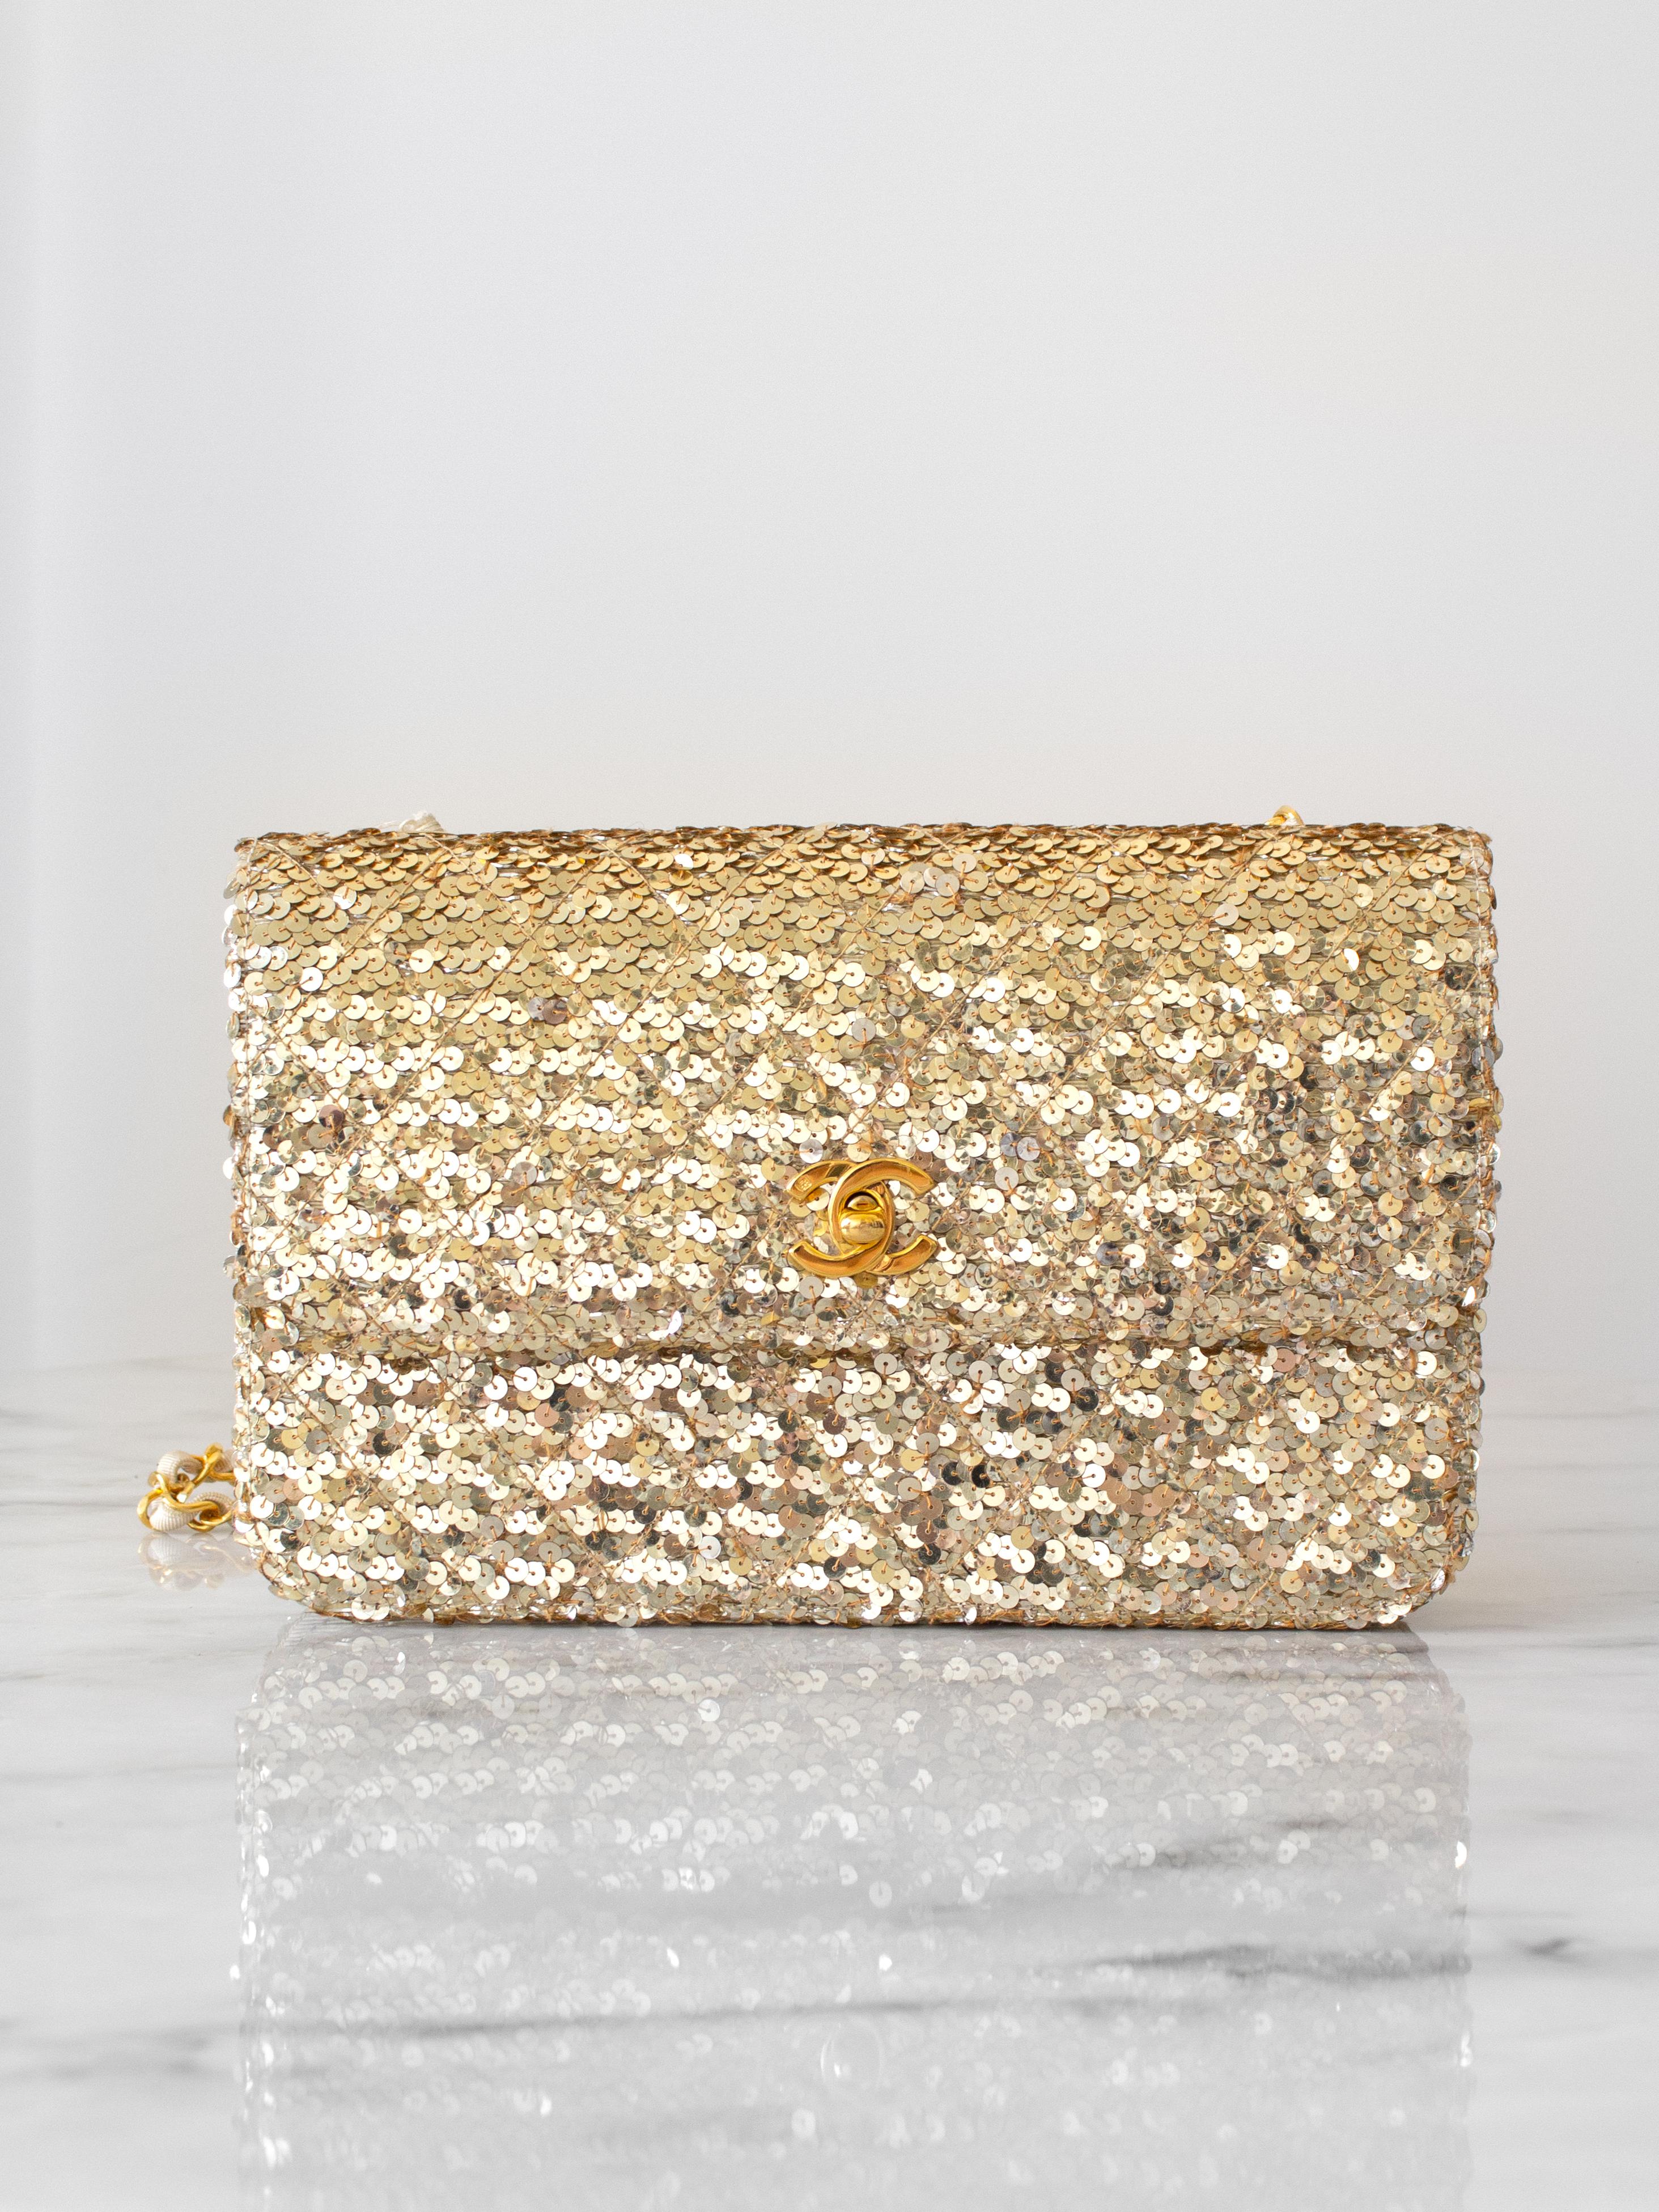 Rare Chanel Vintage S/S1991 Champagne Gold Sequin Medium Flap Bag In Good Condition For Sale In Jersey City, NJ